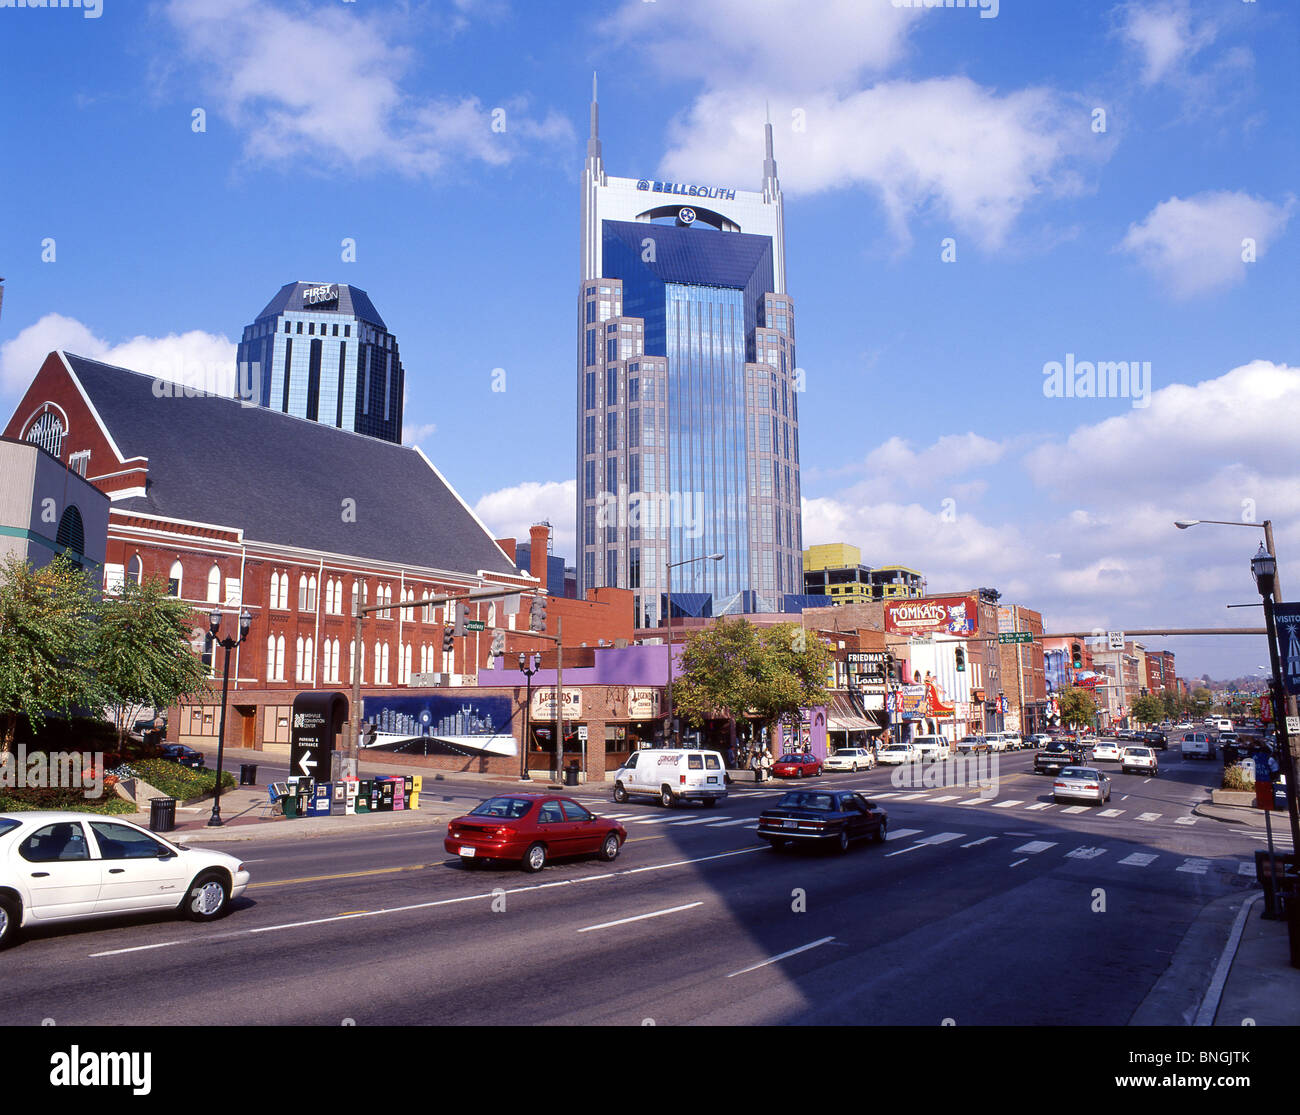 Bellsouth tower and bars, Broadway, Nashville, Tennessee, United States of America Stock Photo